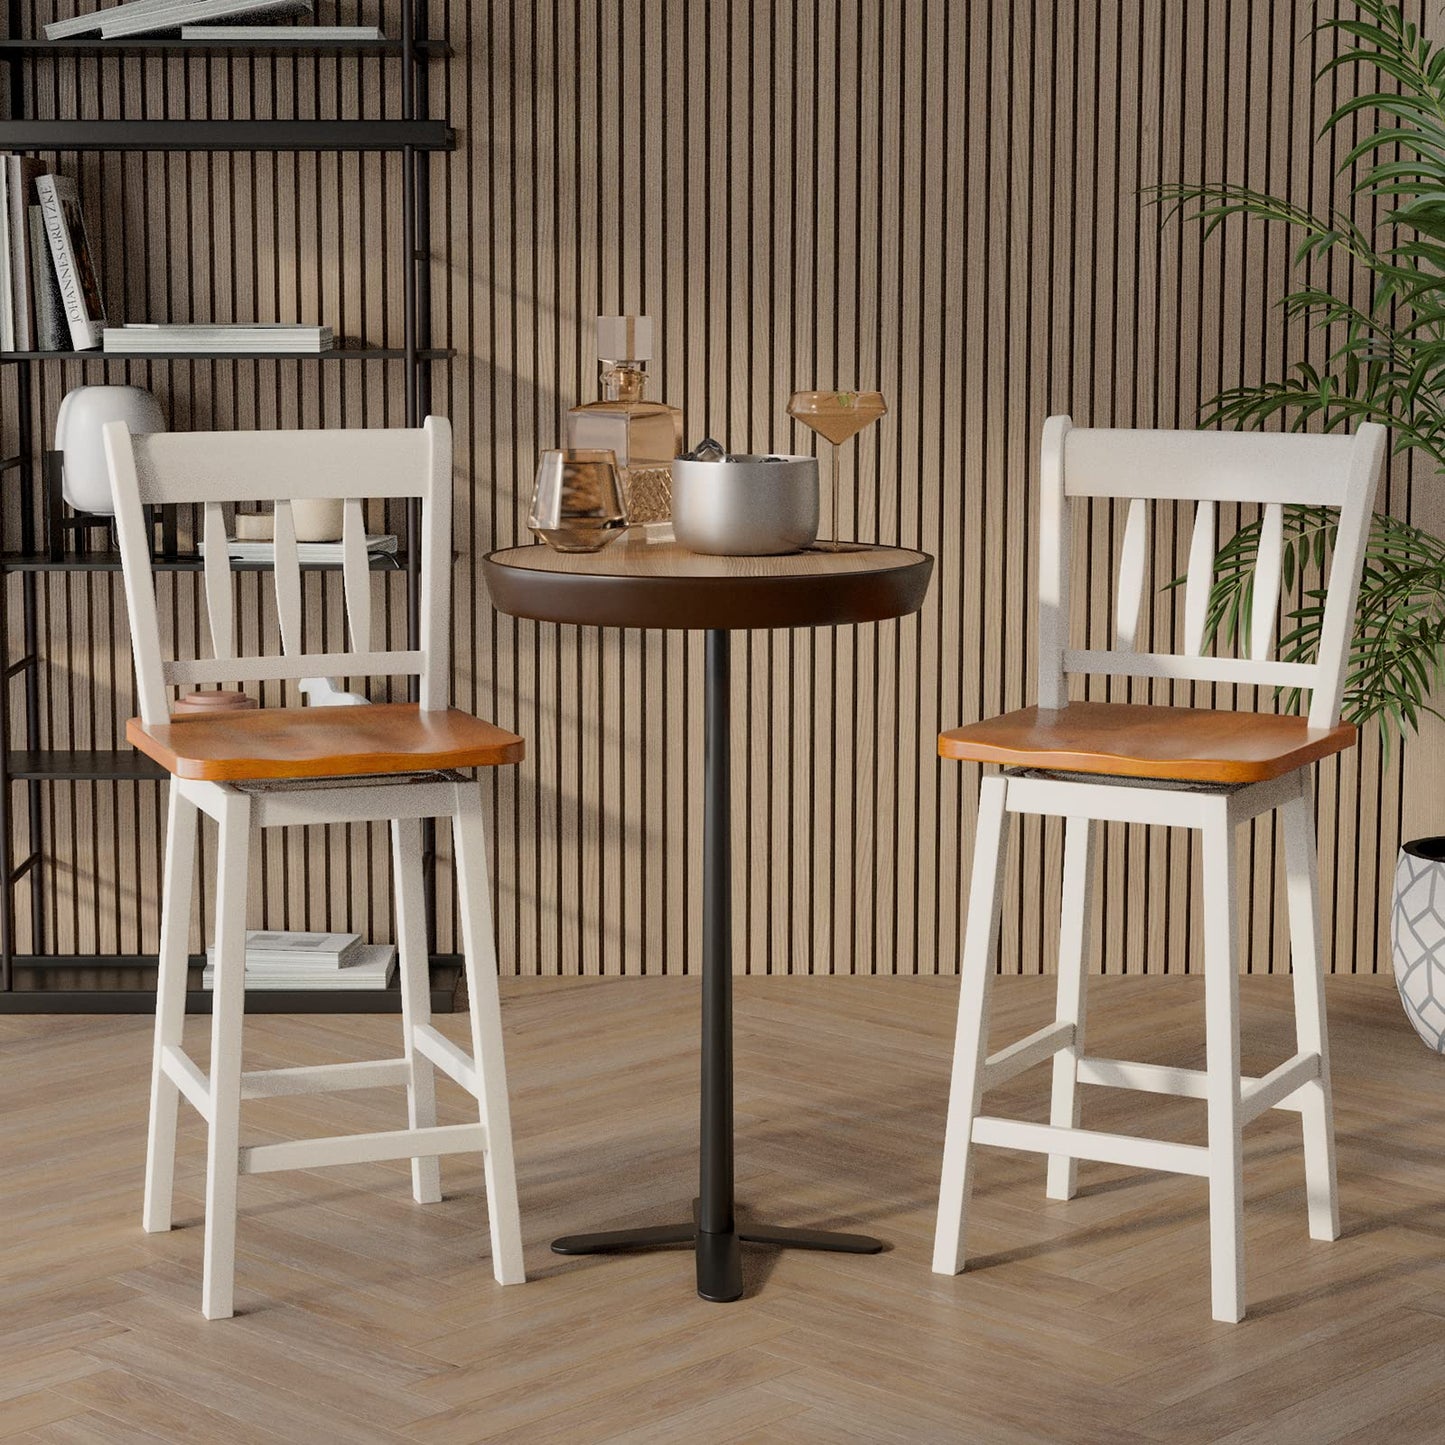 COSTWAY Bar Stools Set of 2, 24.5 Inch Rubber Wood Bar Chairs with 360°Swiveling, Footrest, Swivel Counter Height Barstools Ideal for Kitchen Island,